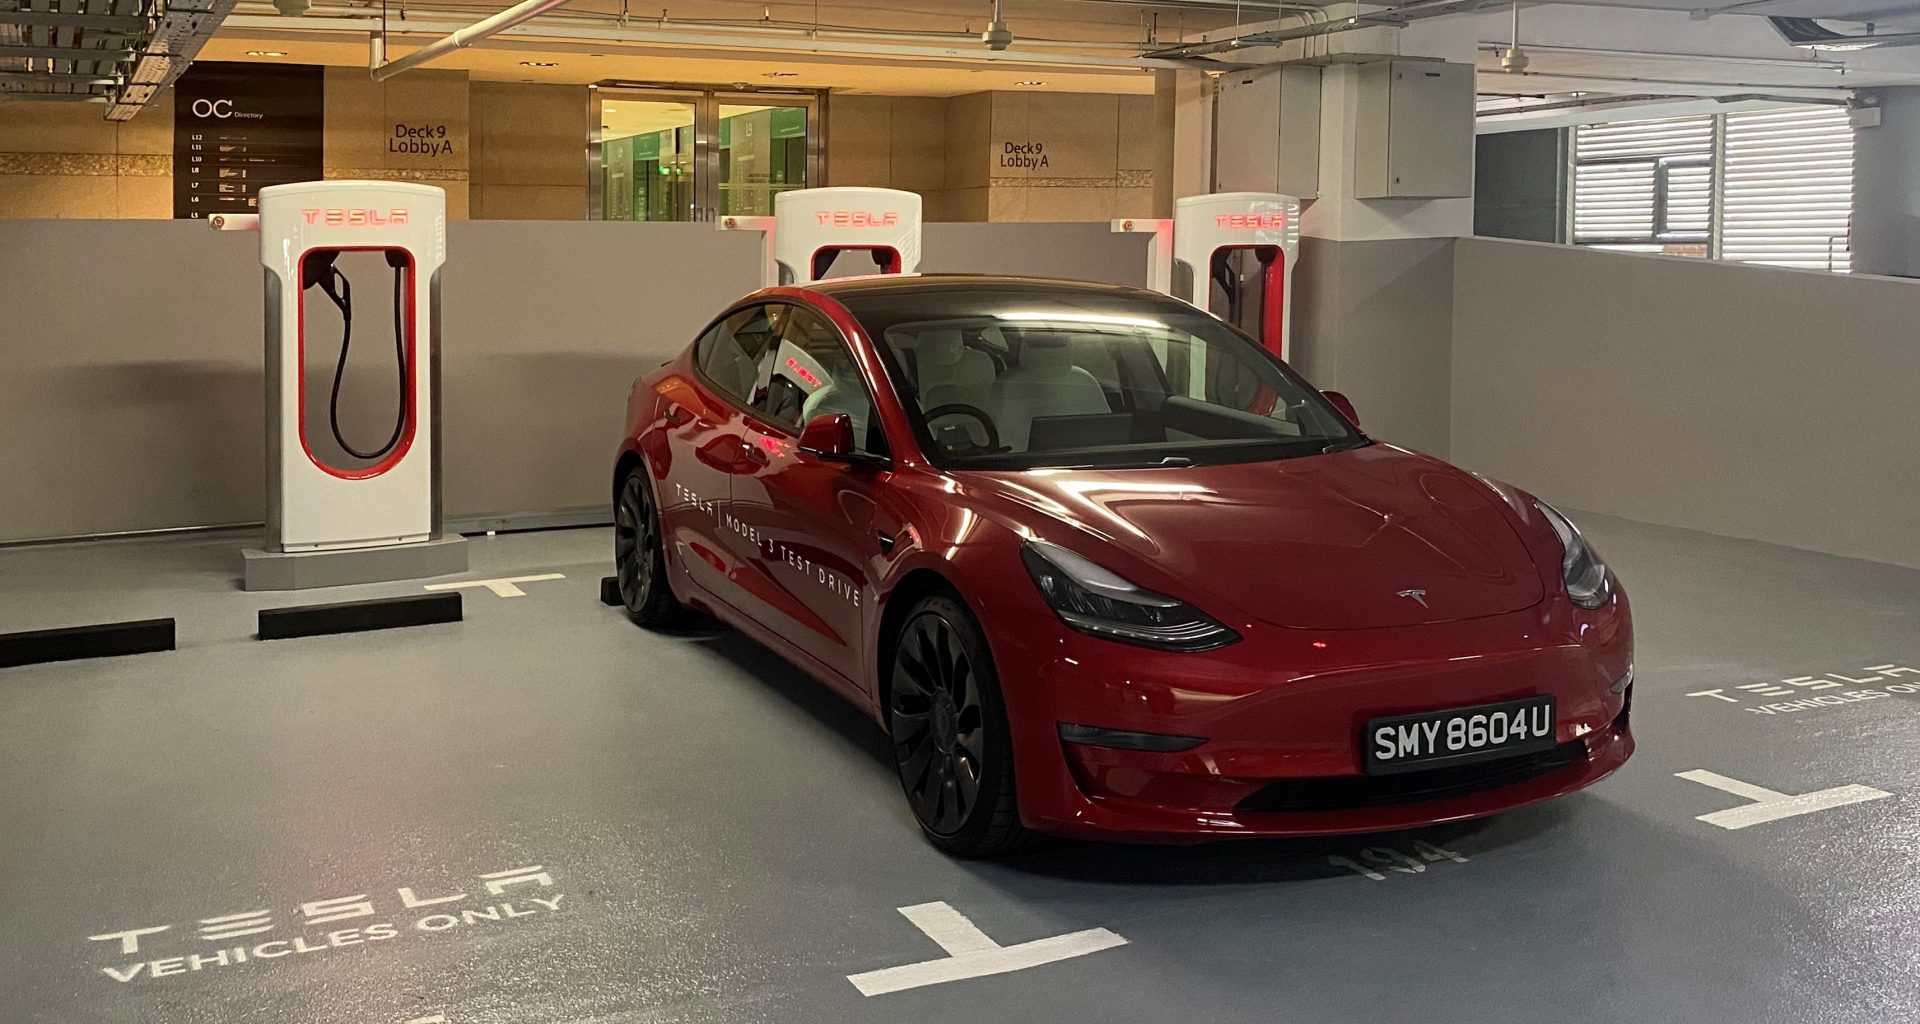 New Tesla V3 Superchargers charging station is now open to public at Orchard Central and available 24/7 - Alvinology